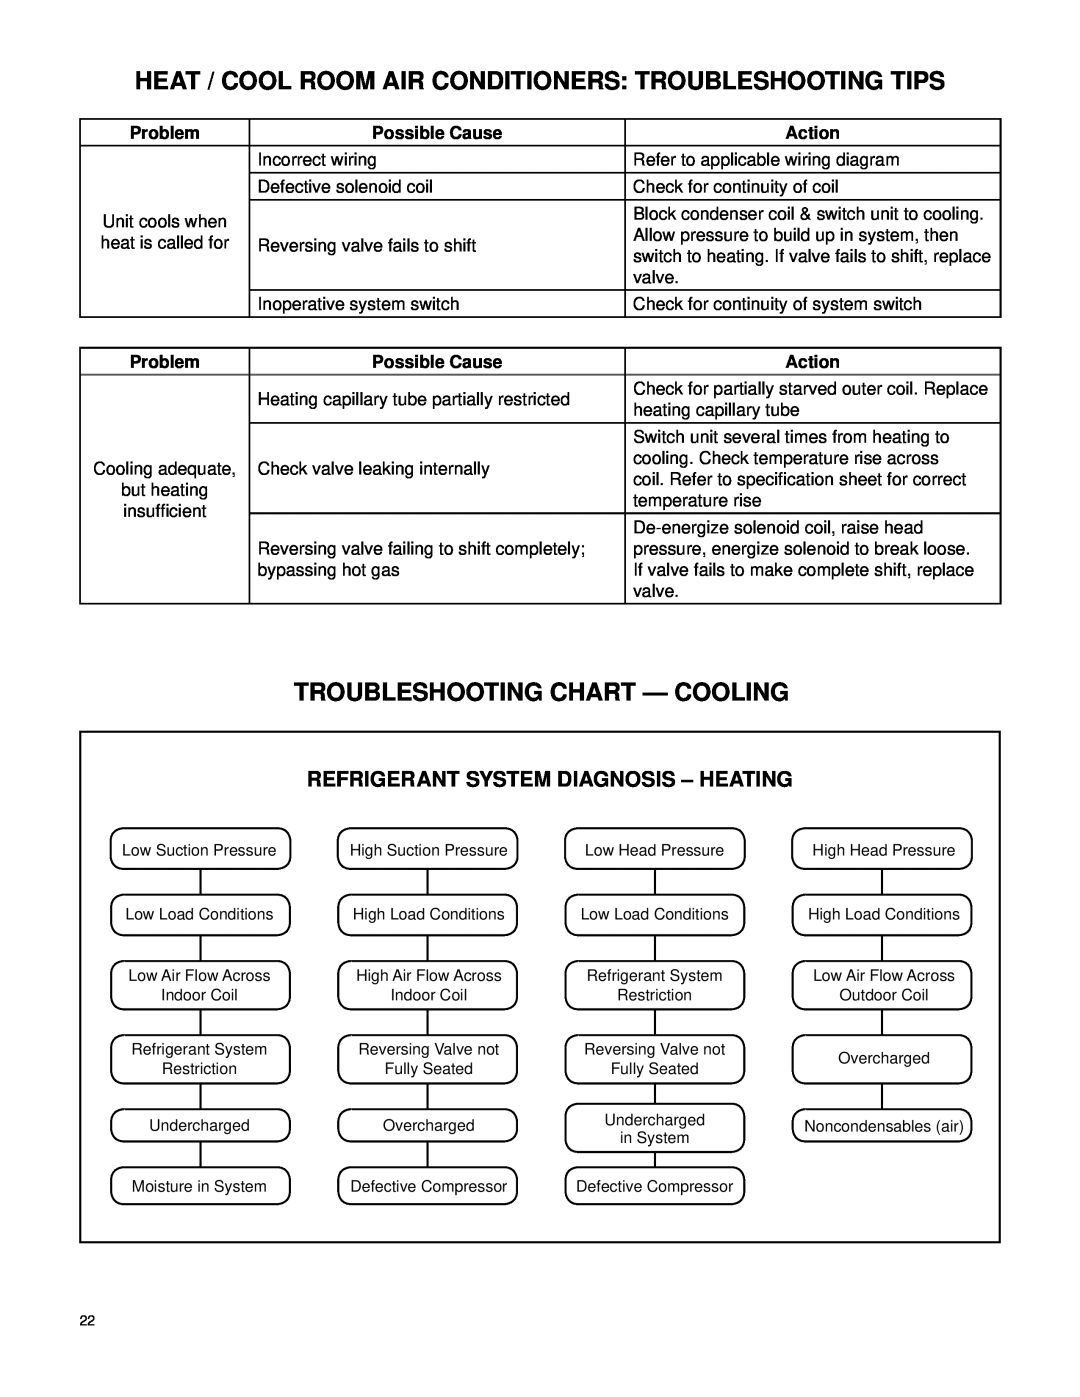 Friedrich 2007 service manual Troubleshooting Chart - Cooling, Refrigerant System Diagnosis - Heating 